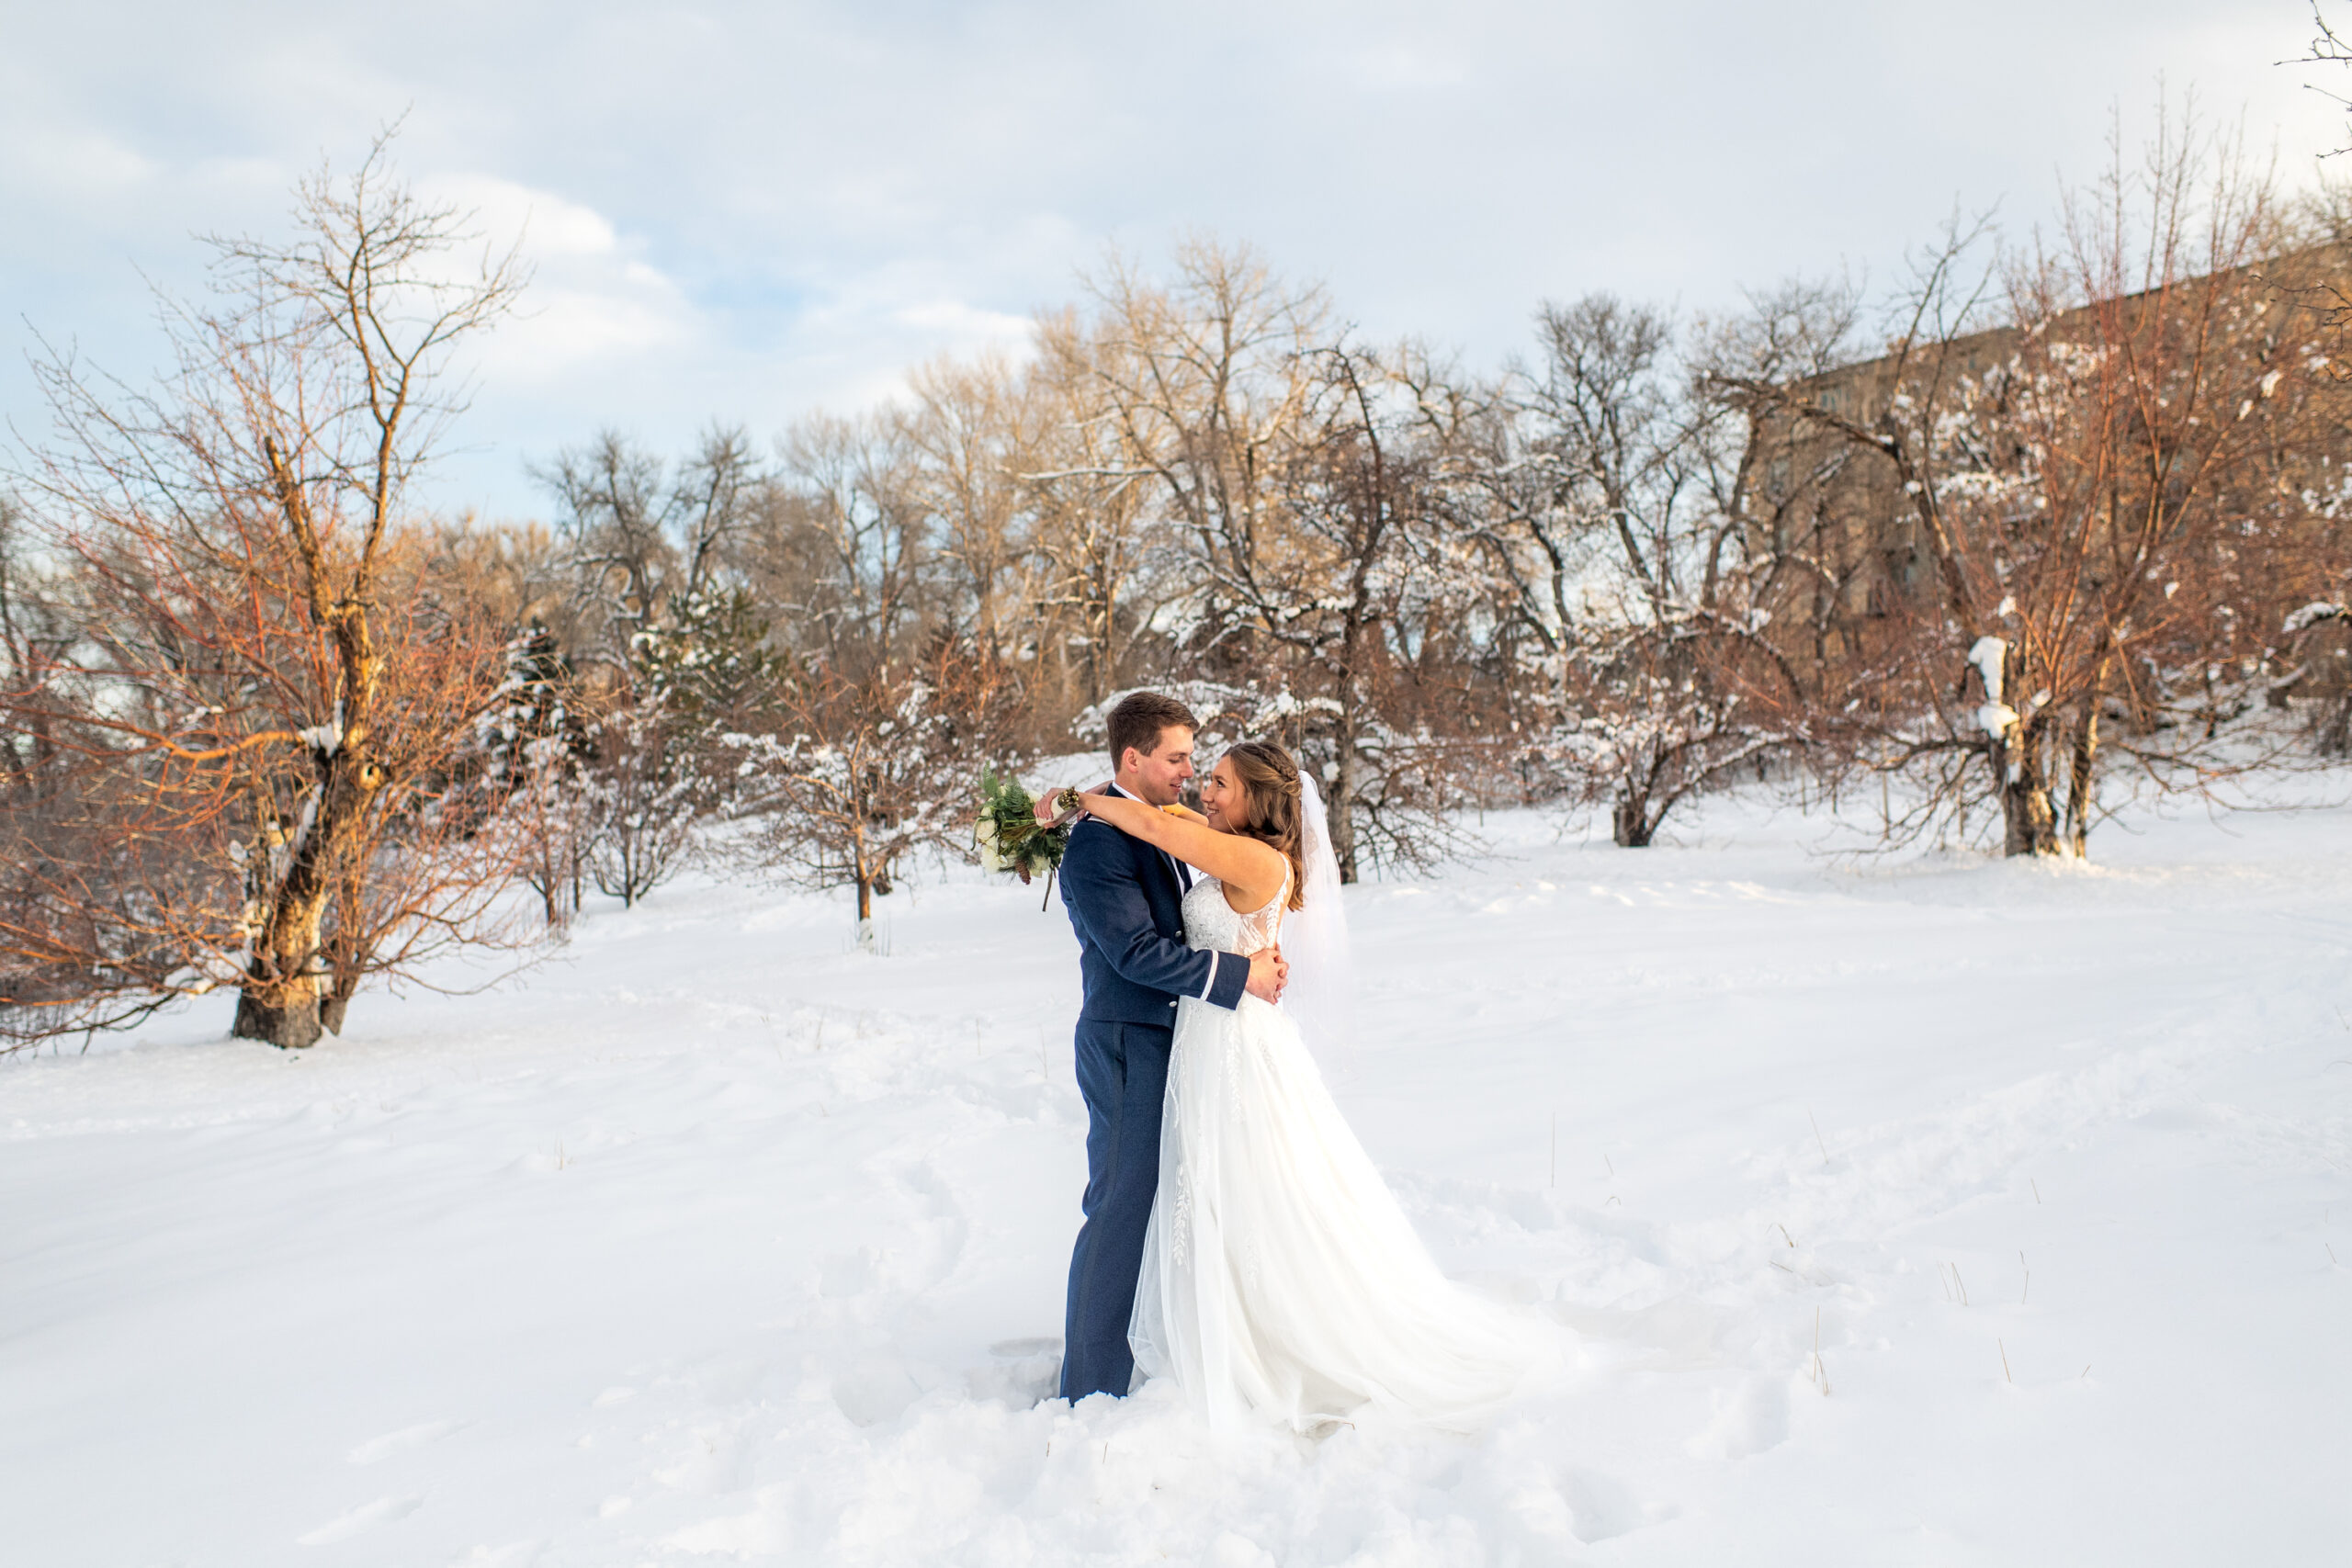 The bride and groom pose at Fly'n B Park in Littleton, Colorado, during their wedding at Ashley Ridge by Wedgewood Weddings.